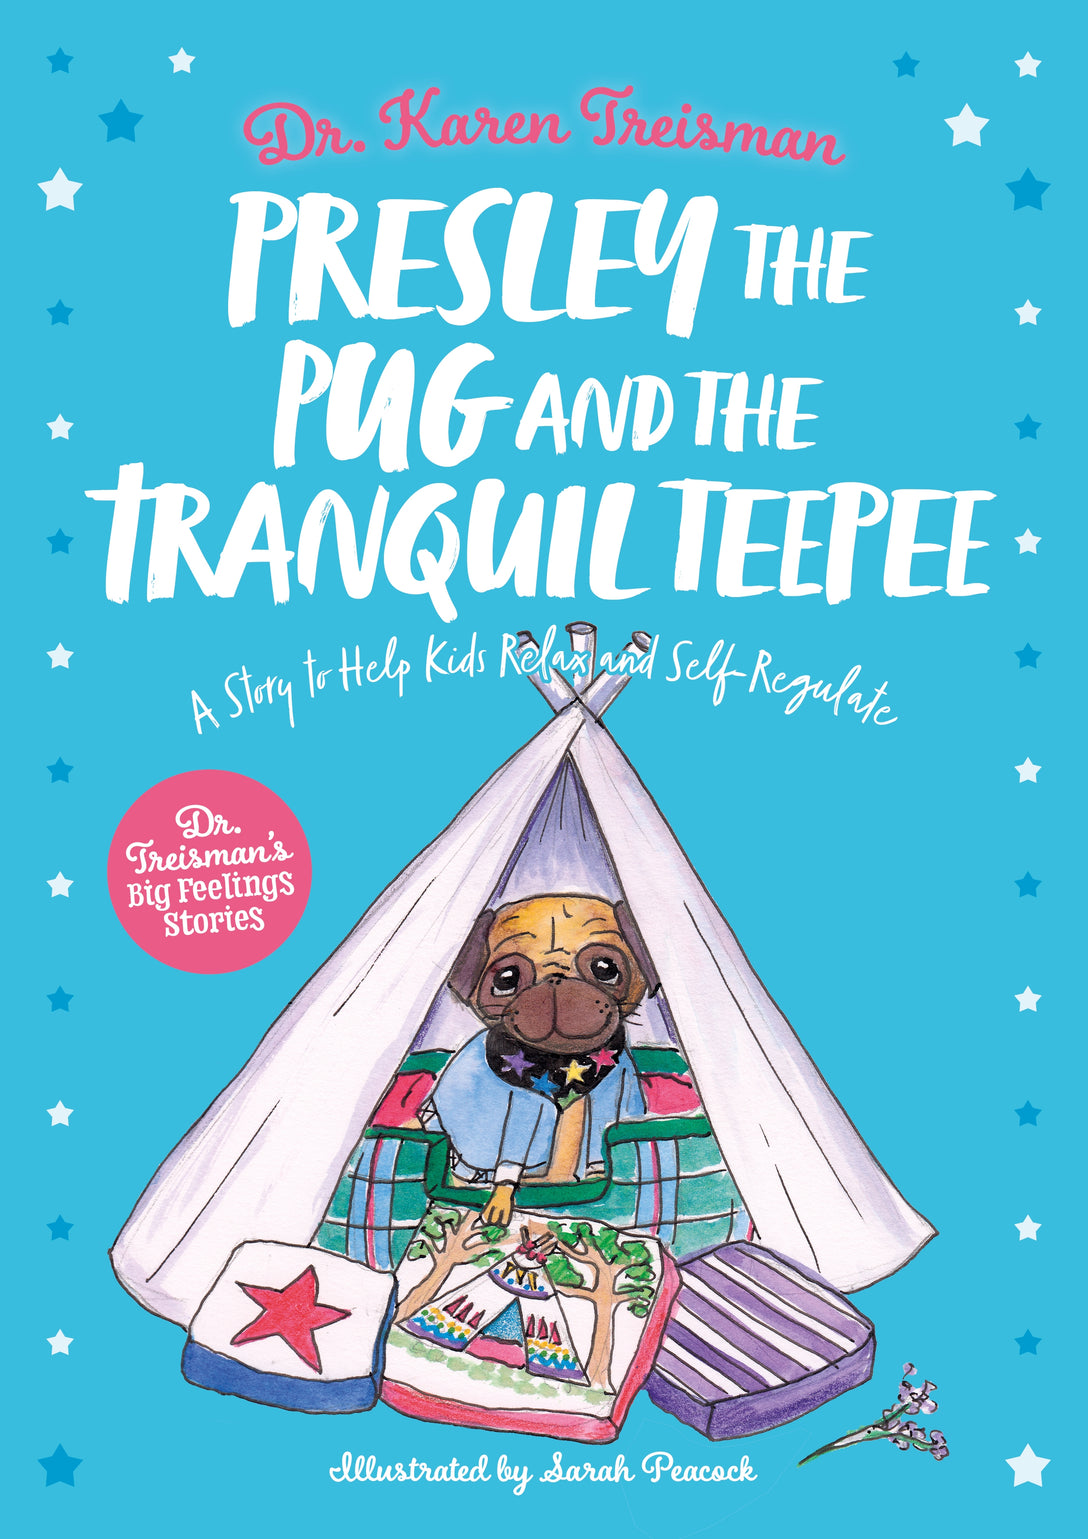 Presley the Pug and the Tranquil Teepee by Karen Treisman, Sarah Peacock